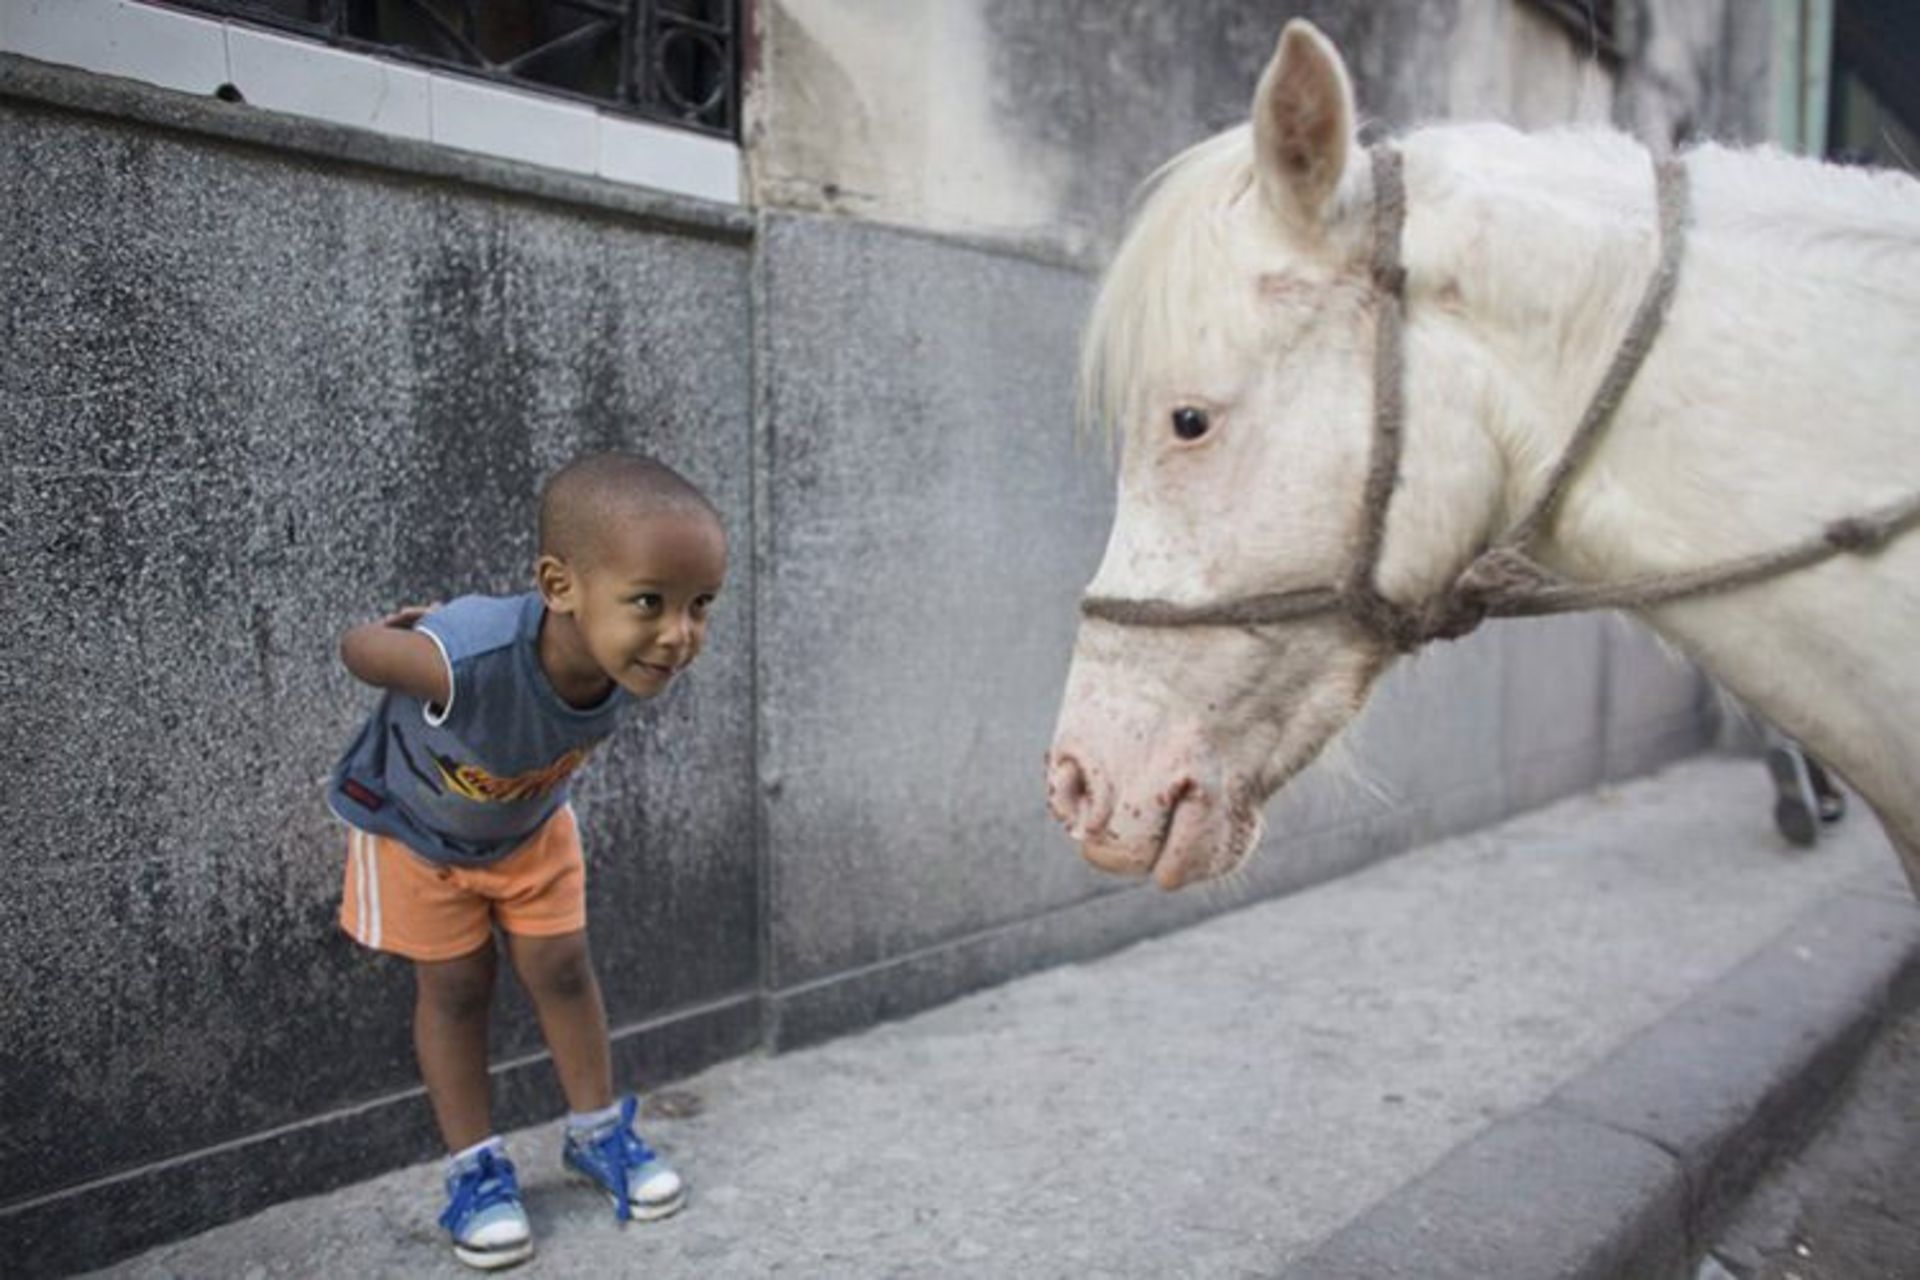 20 alexo carmona 2 looks at coco a two year old pony in downtown havana s b9452